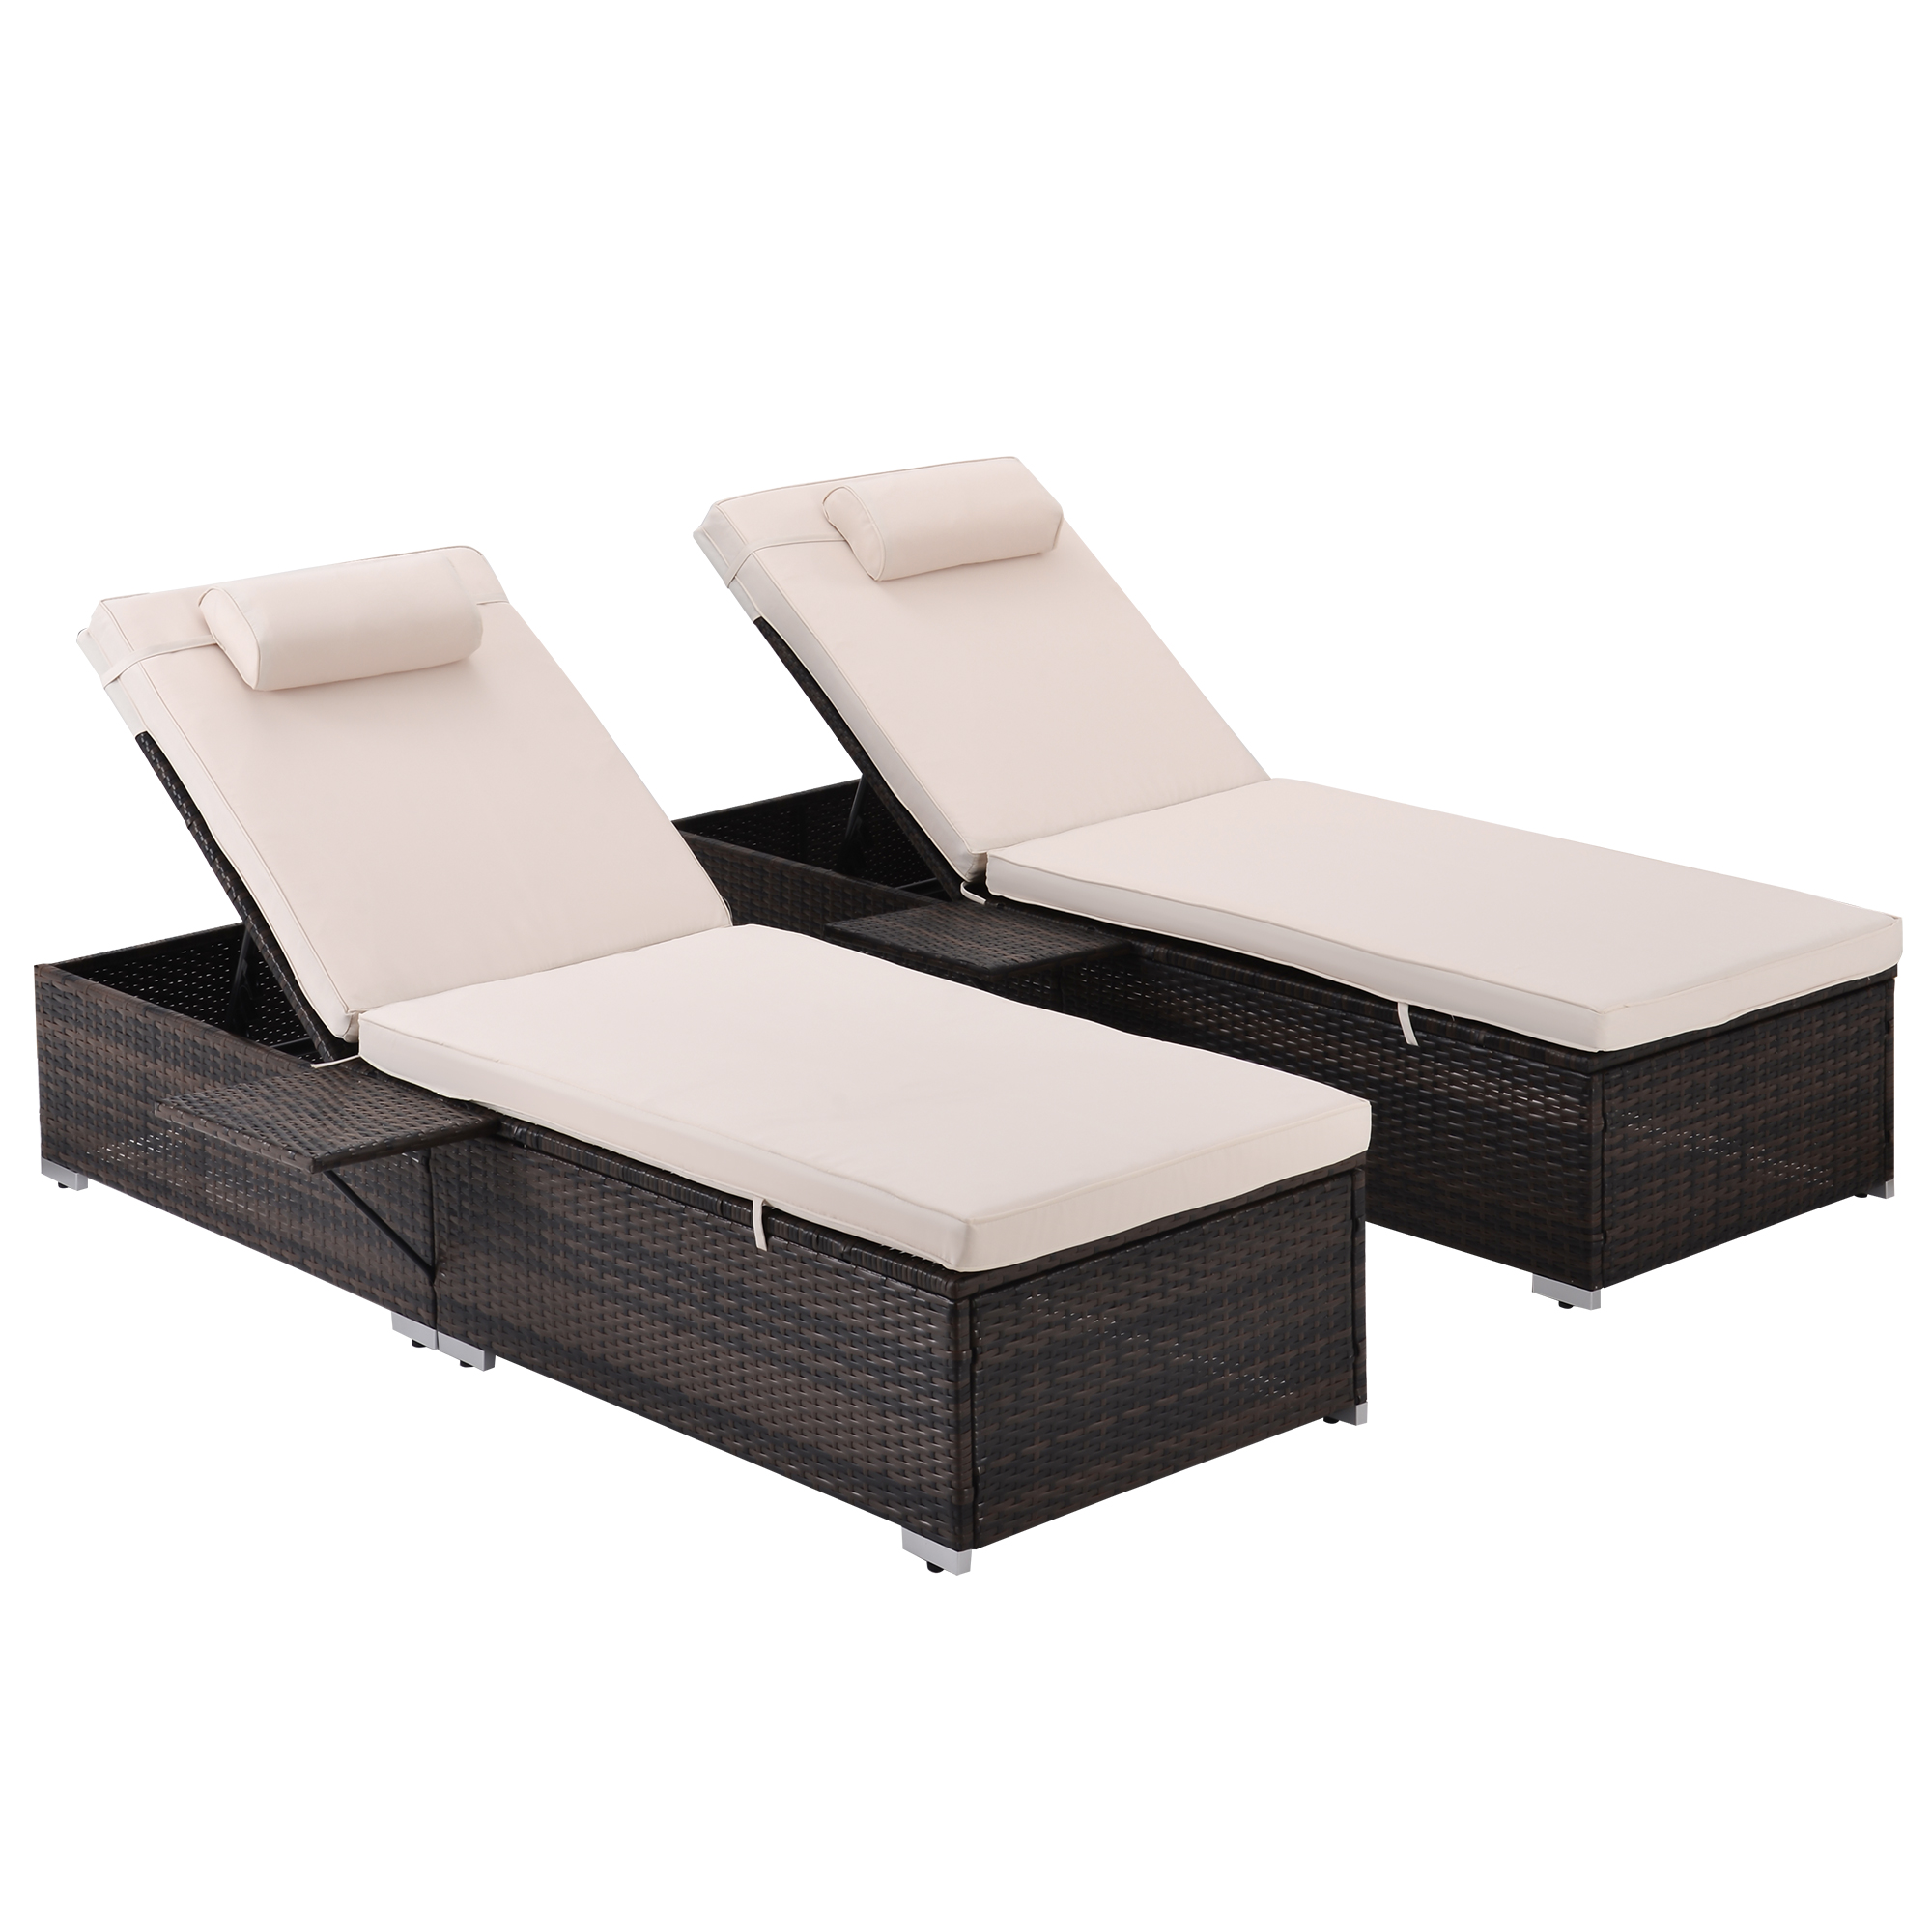 Outdoor Patio Reclining Chairs Clearance, 2 PCS Wicker Patio Chaise Lounge Set, Outdoor Rattan Lounge Chair with Cushion, Side Table&Head Pillow, Adjustable Recliners for Pool Backyard, Brown, J2470 - image 3 of 15